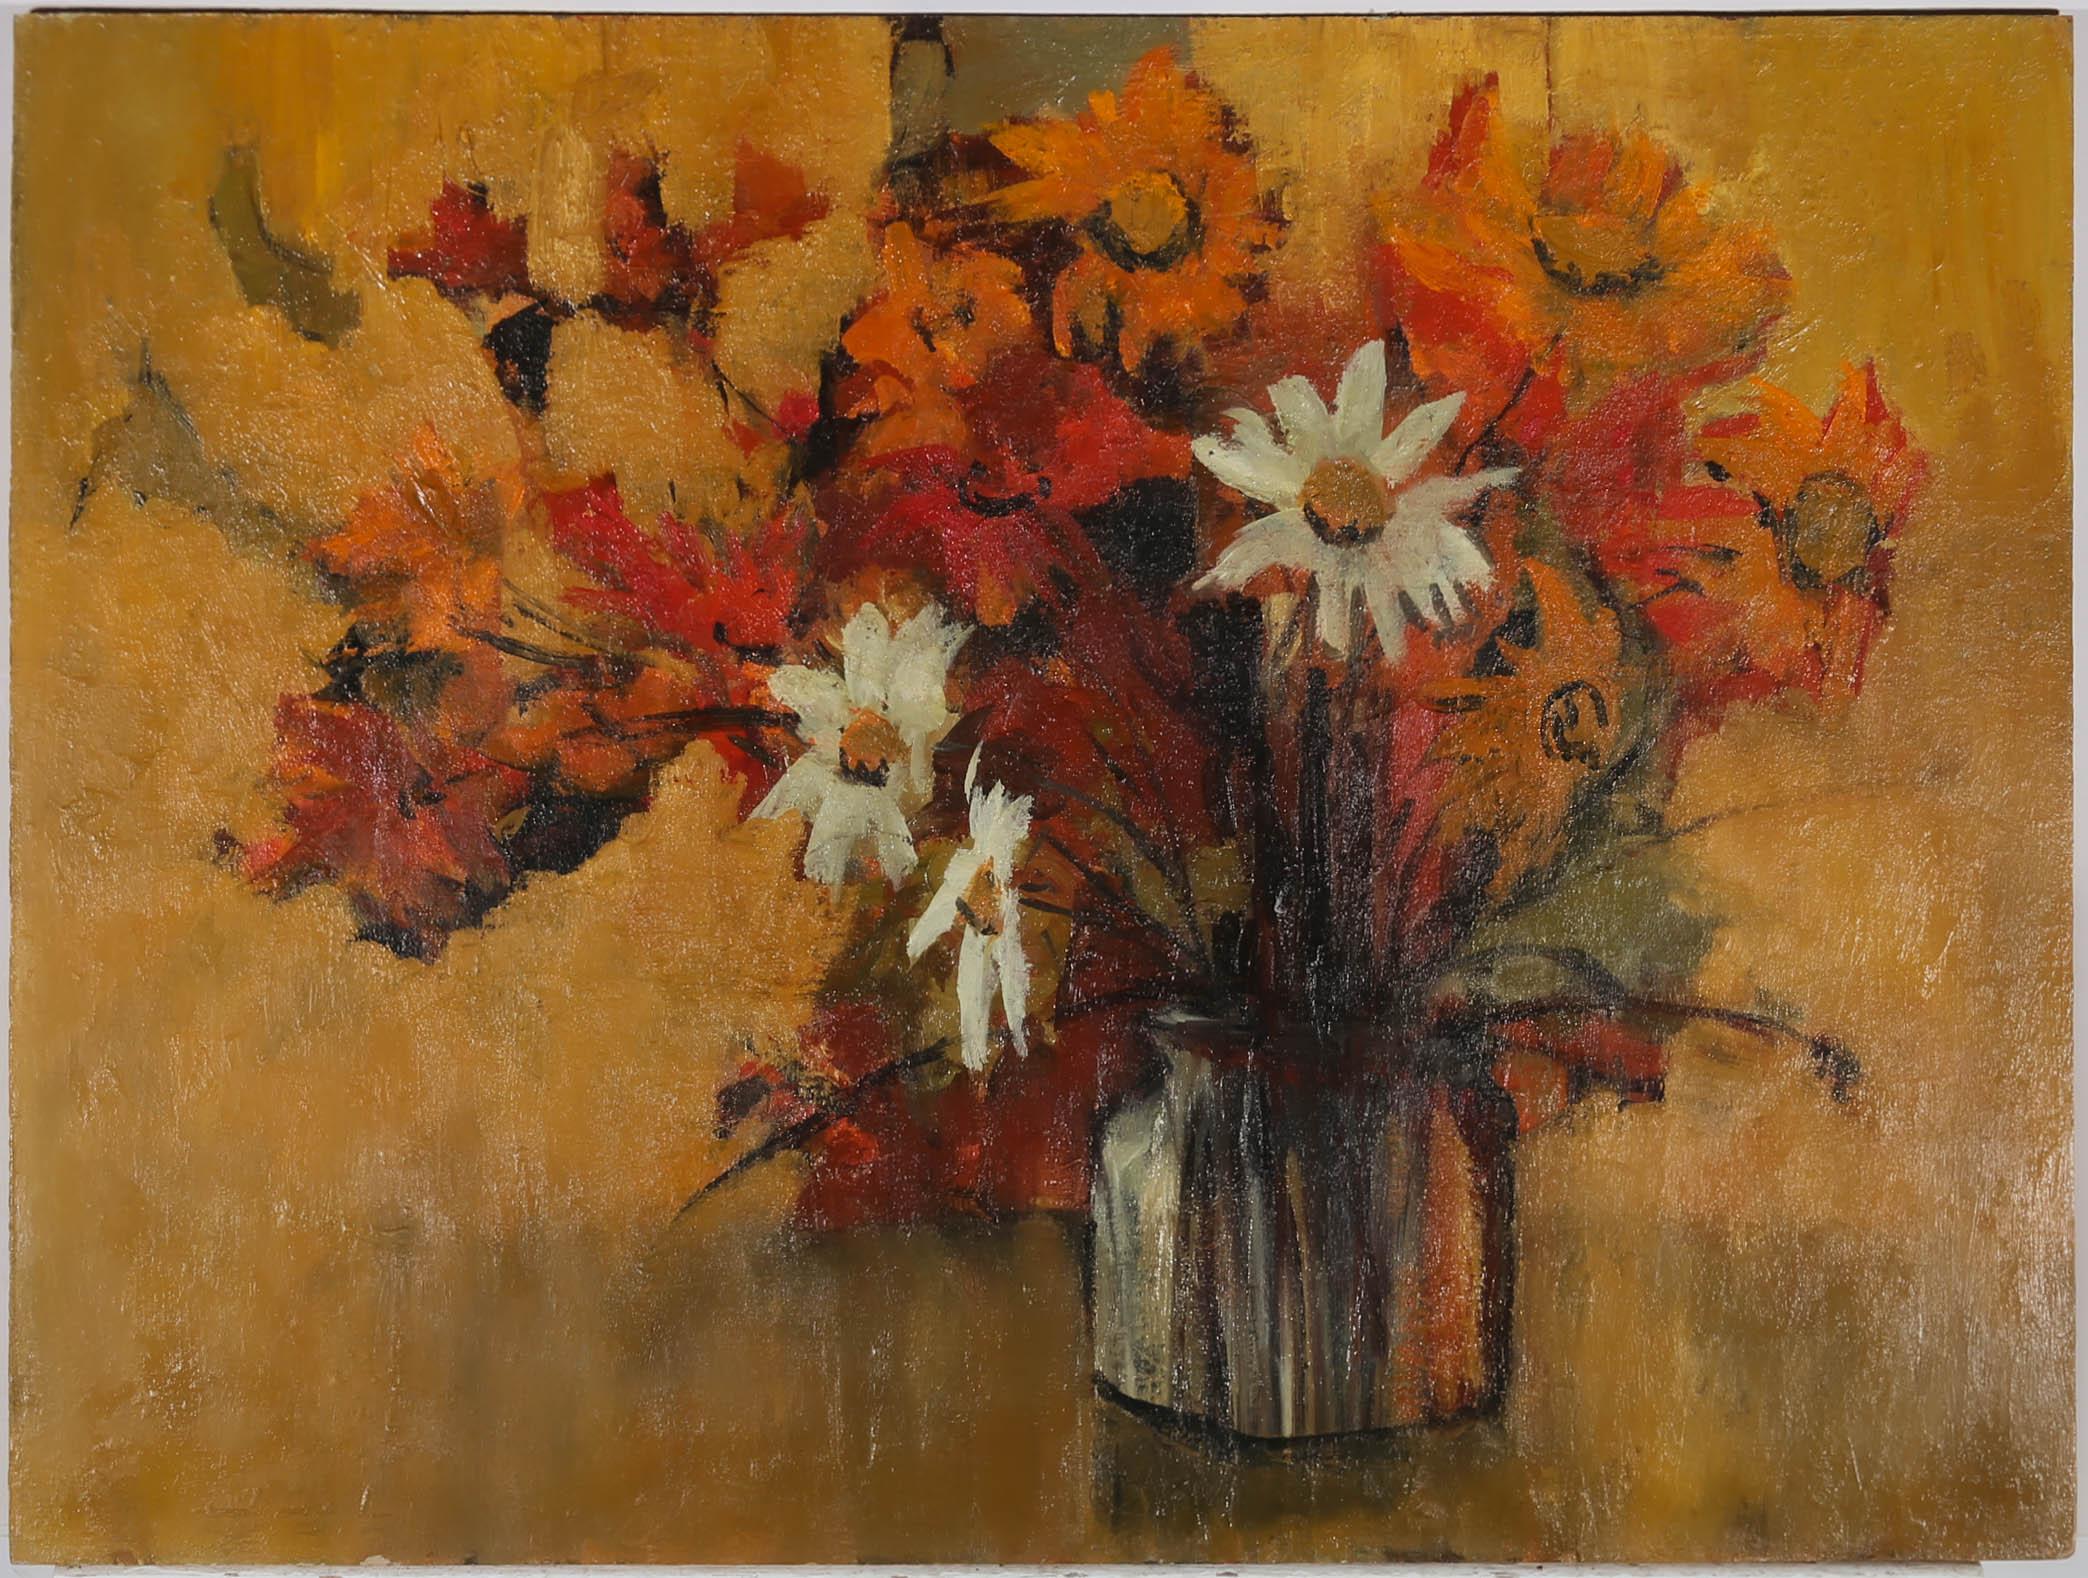 A charming still life study of a vase of wildflowers against an orange background. The artist uses expressive brushwork and a slight impasto technique to create depth and texture in the scene. Unsigned. On board.